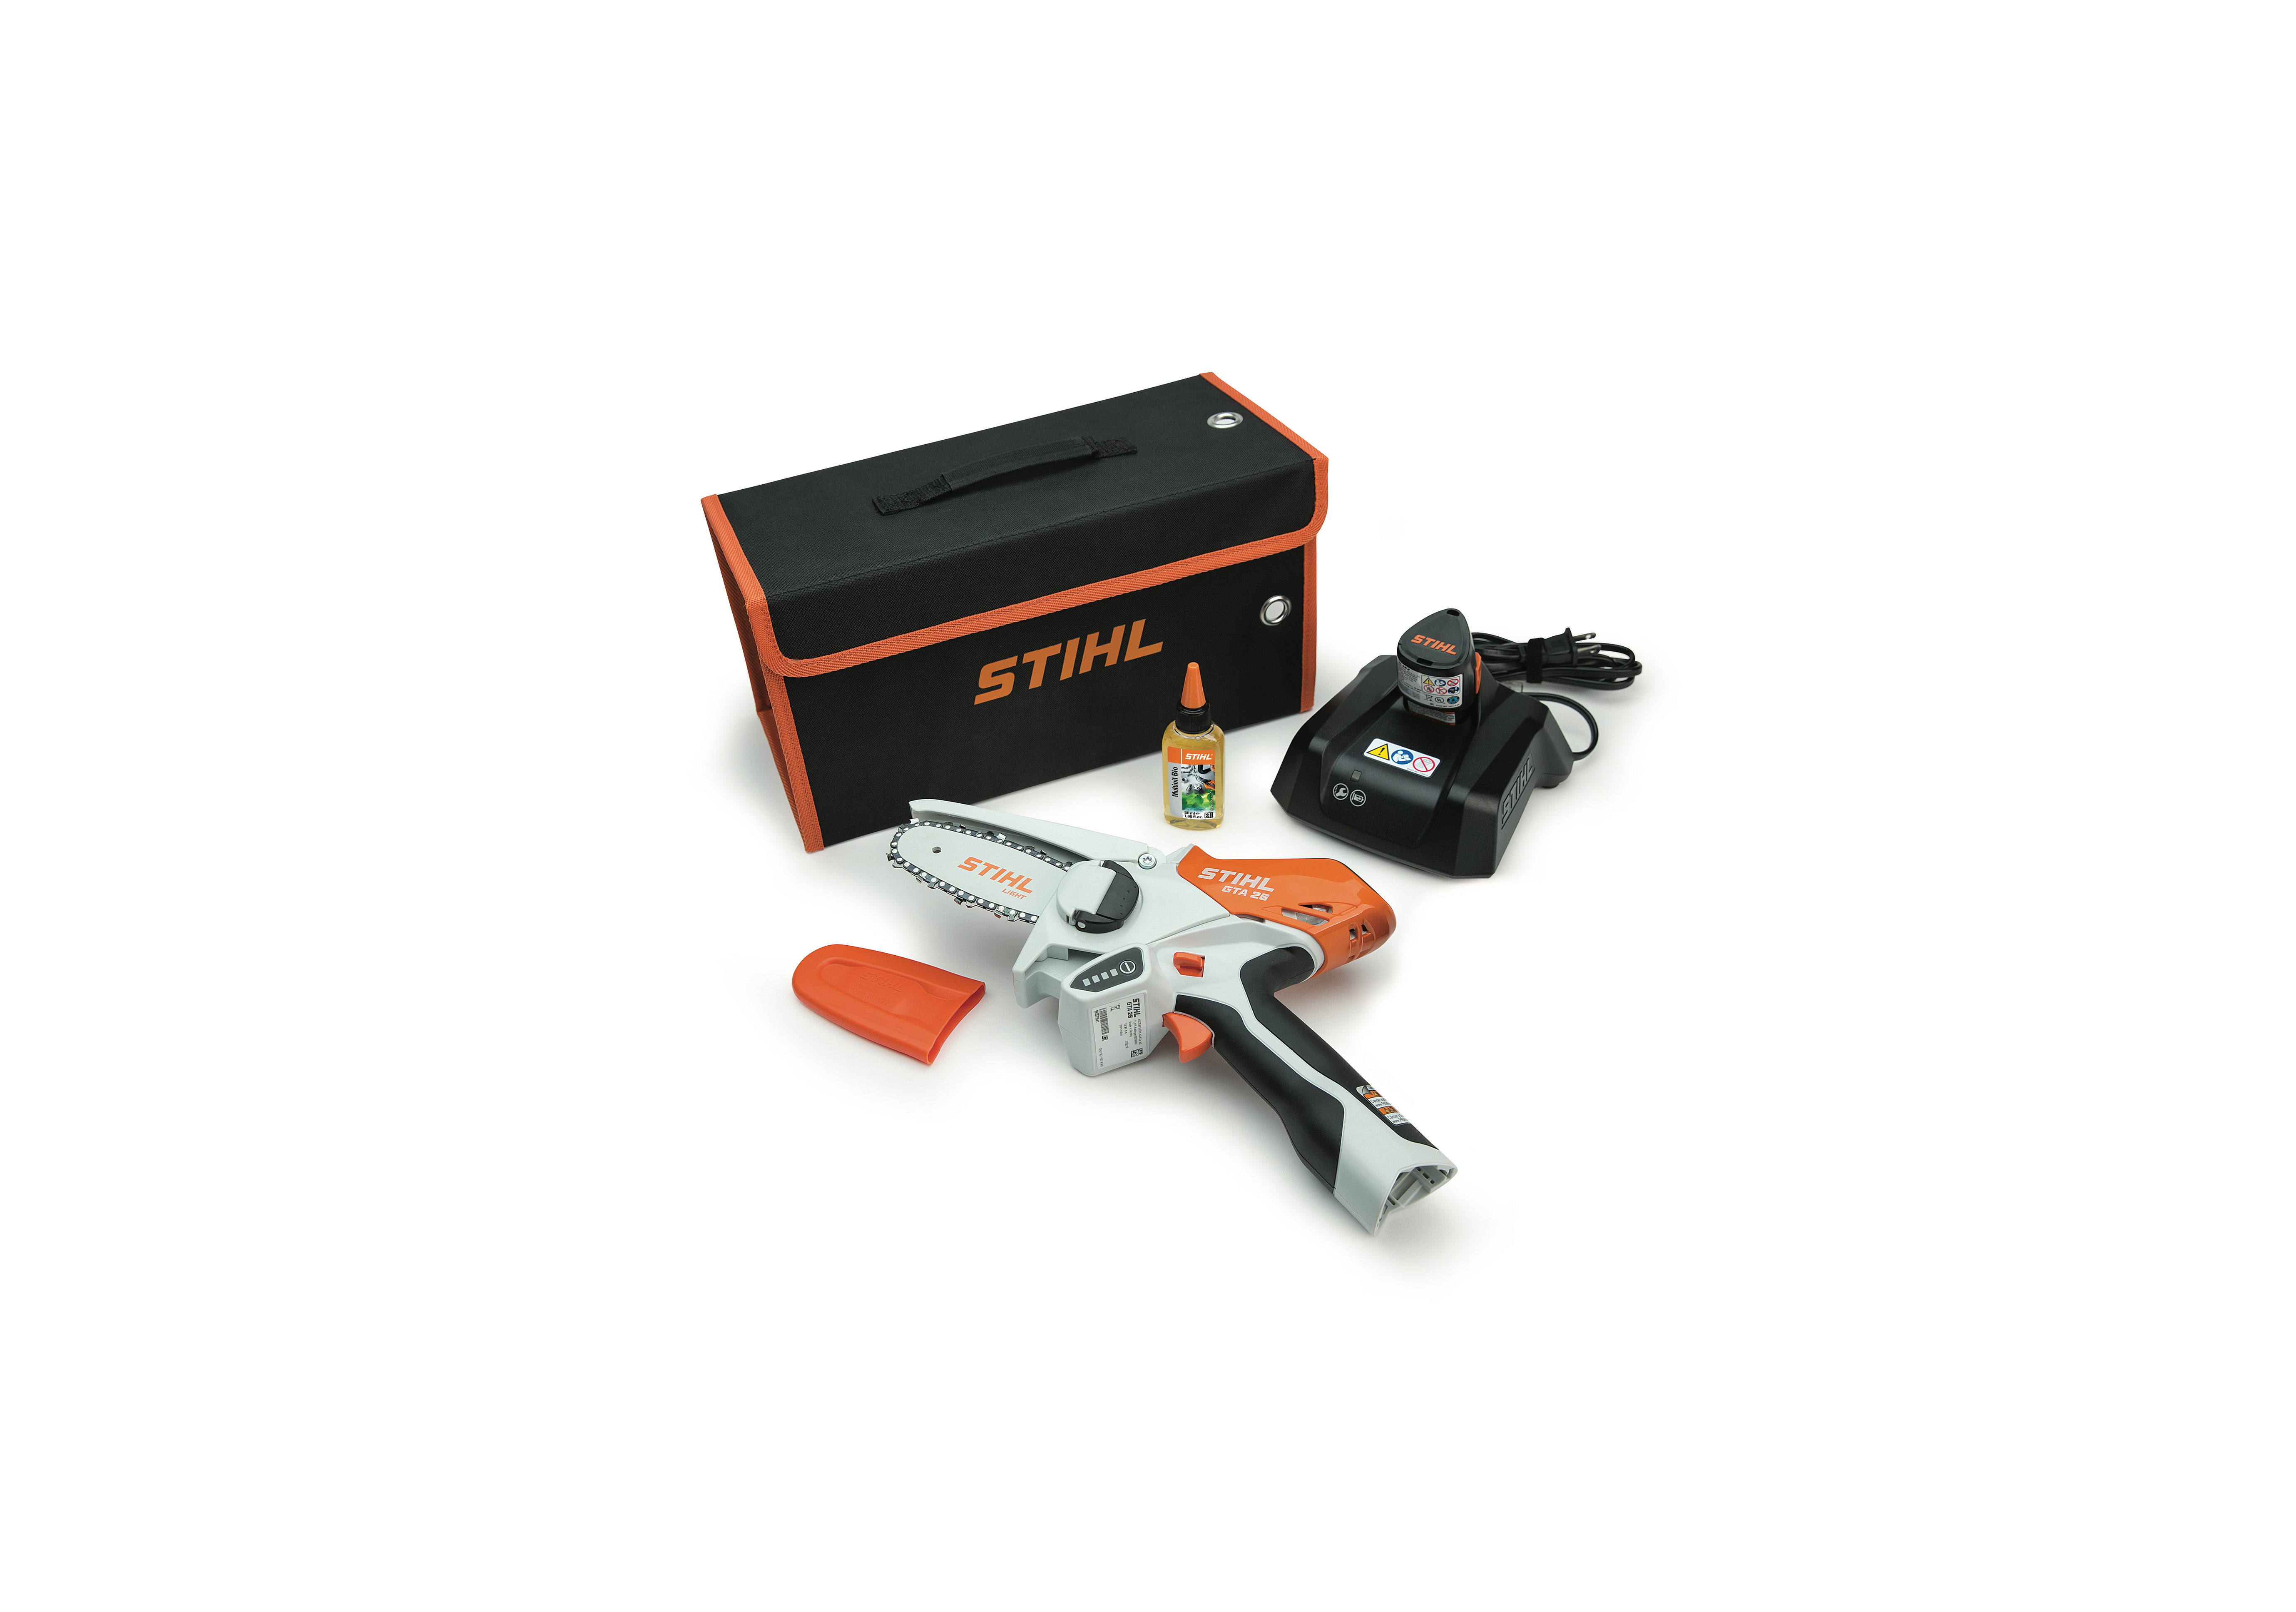 GTA 26 Scam, Important STIHL Safety Notices